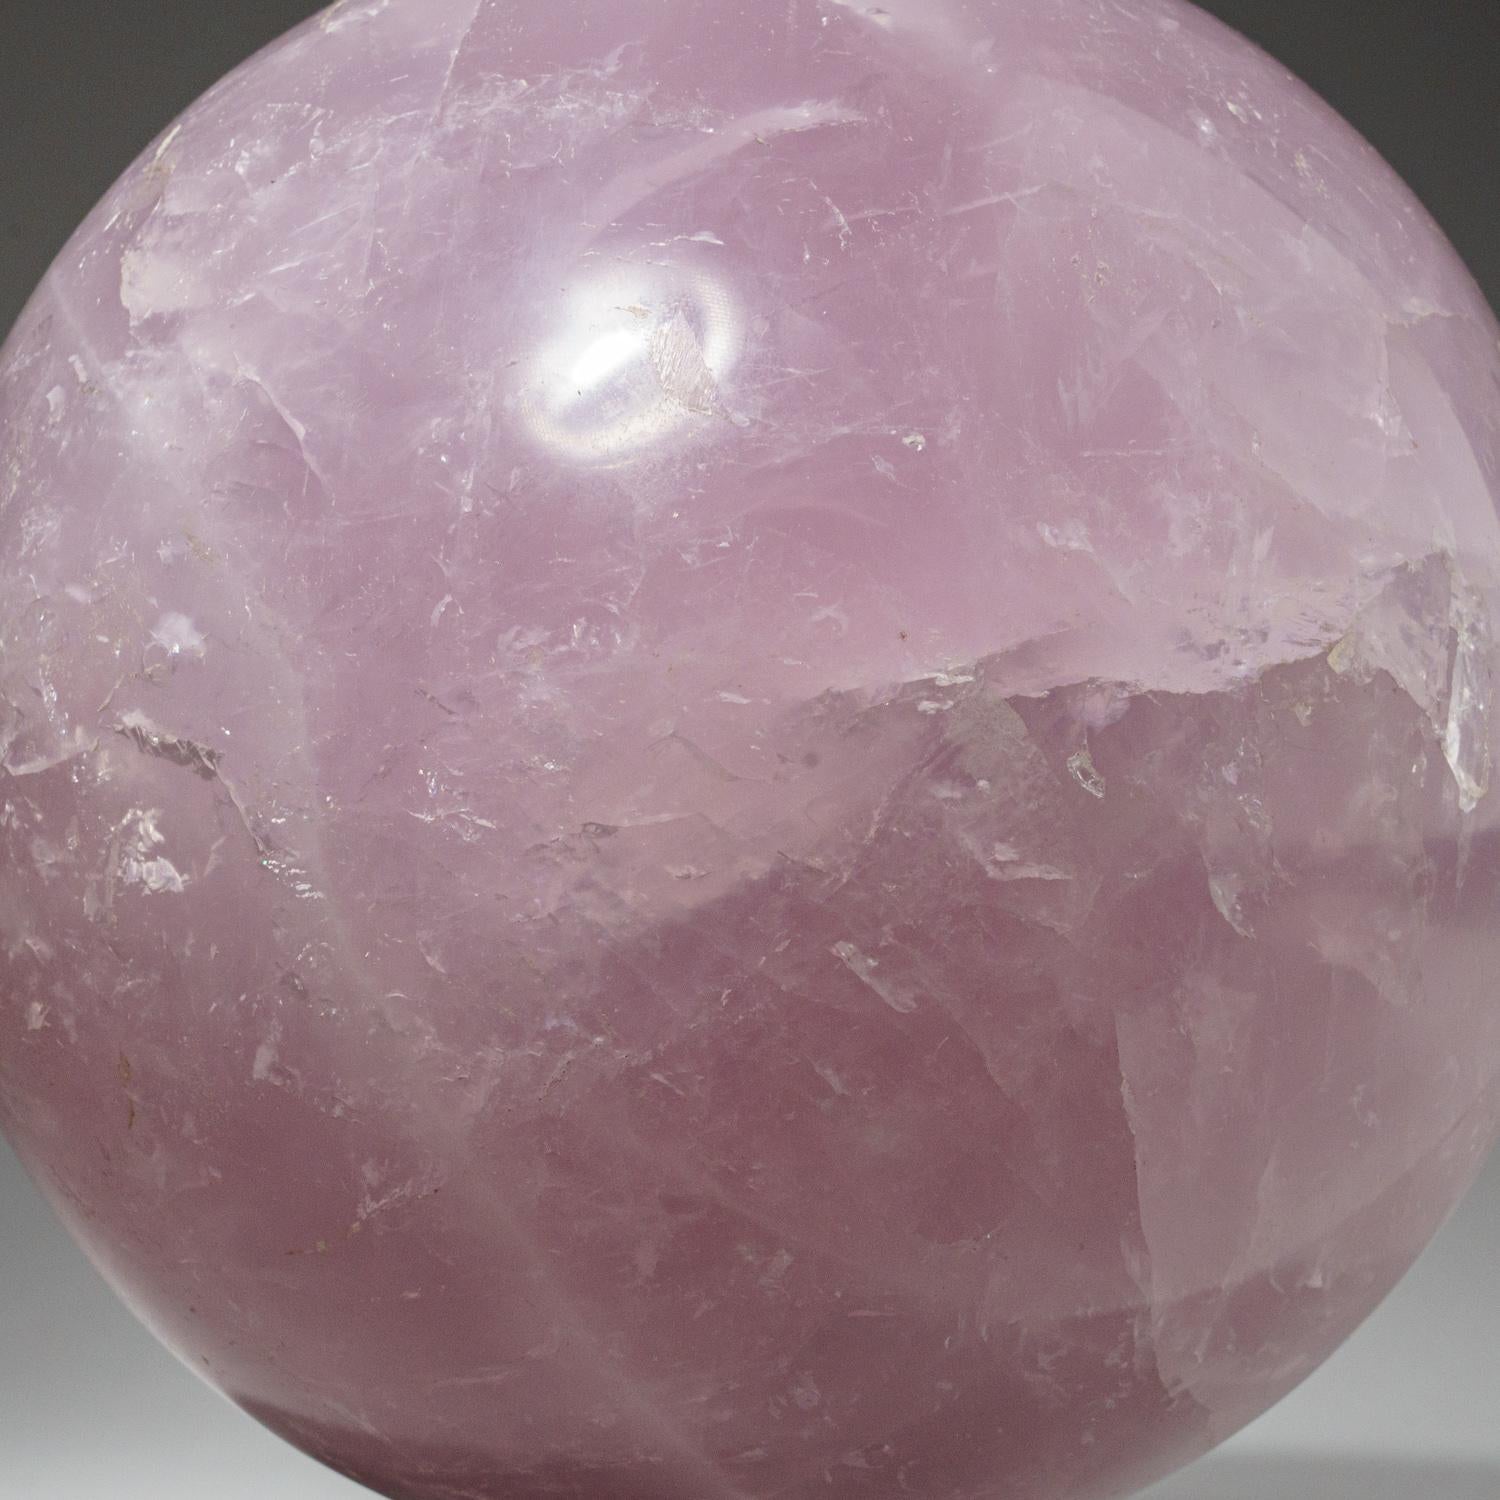 This top quality, hand-polished Rose Quartz Sphere from Madagascar is a stunning pink stone, often used in Heart Chakra work to promote feelings of unconditional love. It is associated with calming and soothing energies, and is known to attract